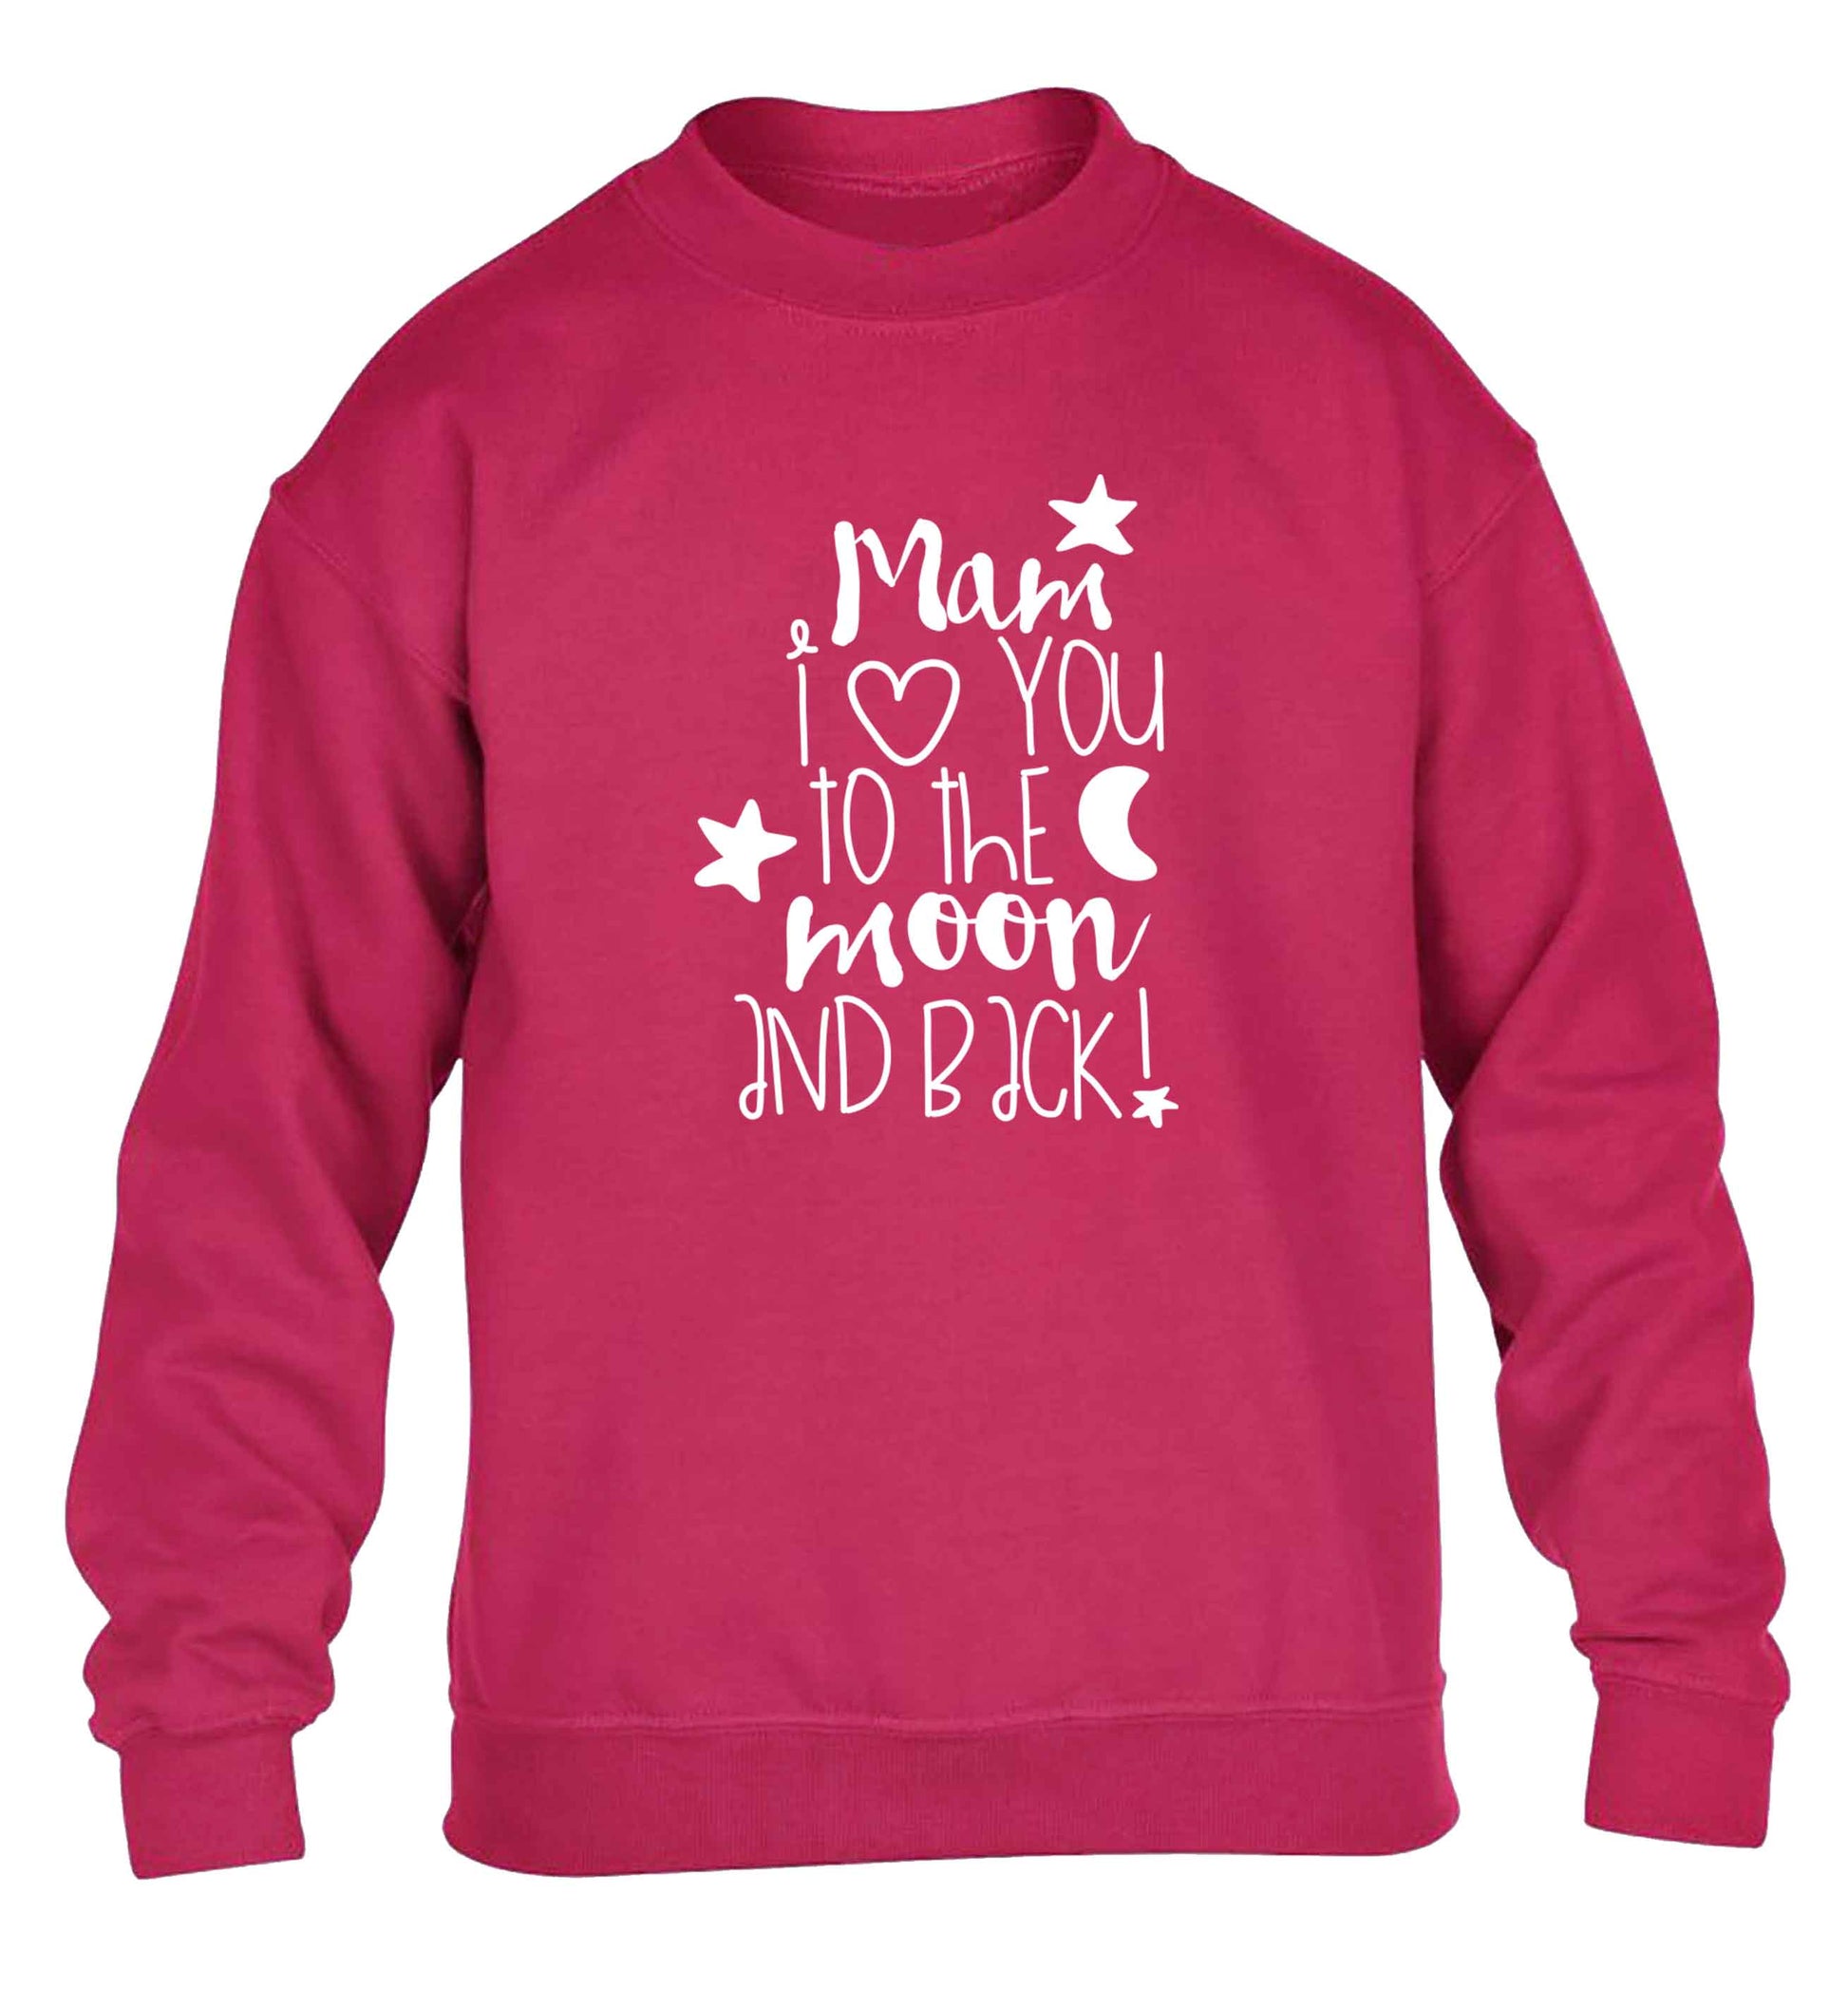 Mam I love you to the moon and back children's pink sweater 12-13 Years